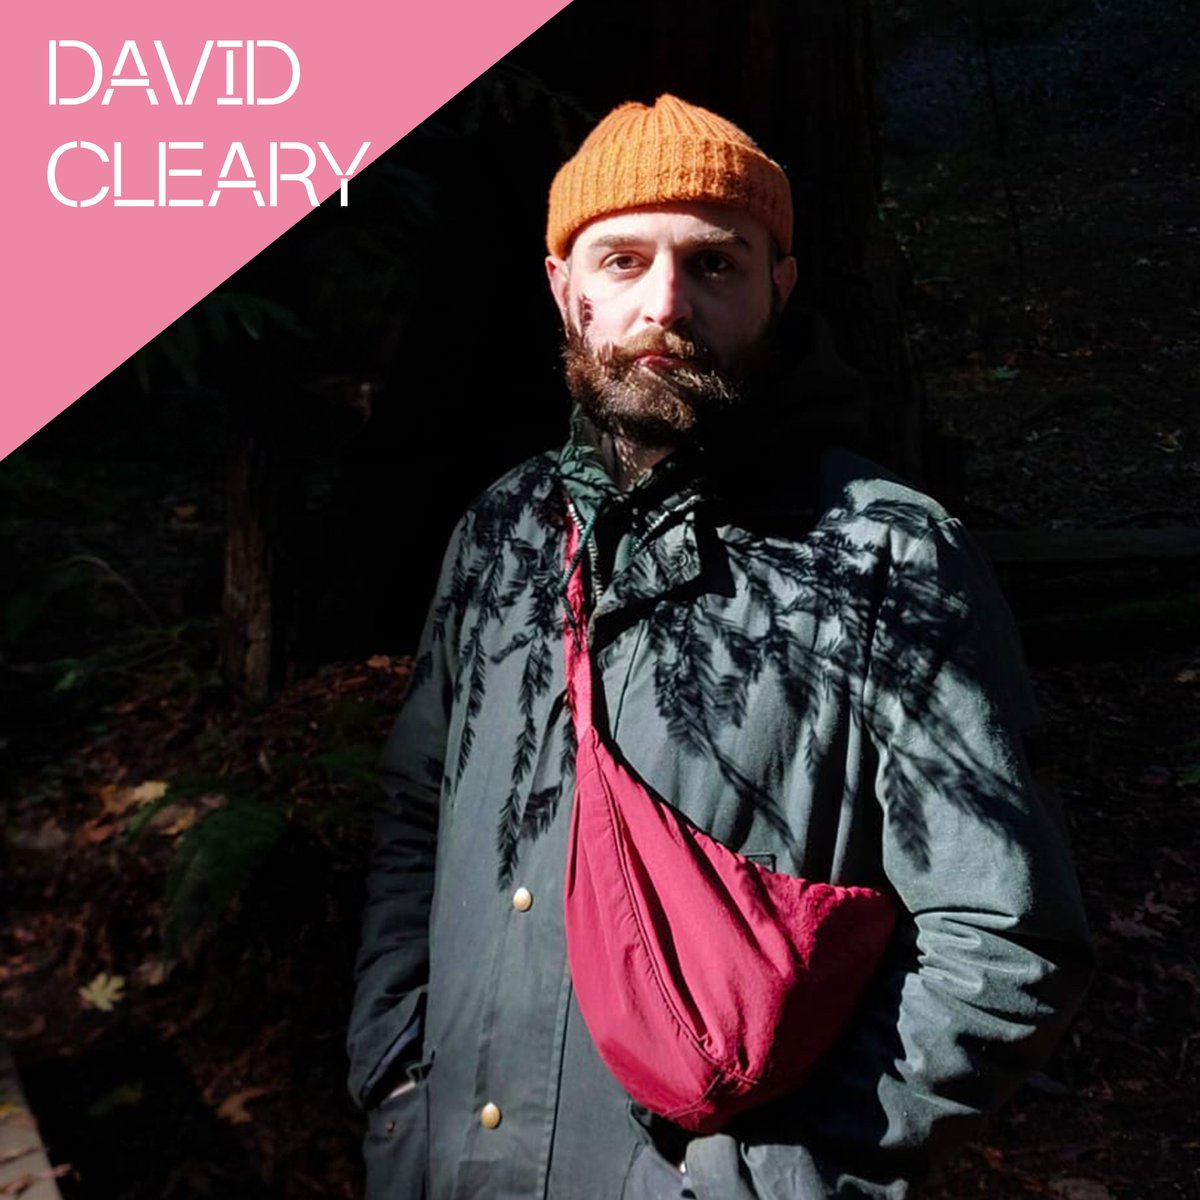 Join our INTER_CHANGE cohort and Dave Cleary for the next session of OPEN HOUSE! On Wed 12 June from 5:30-7:30pm, David’s session will draw upon his experience to lead an informal group conversation exploring artist-led and social practice. ow.ly/pTa550RSklB